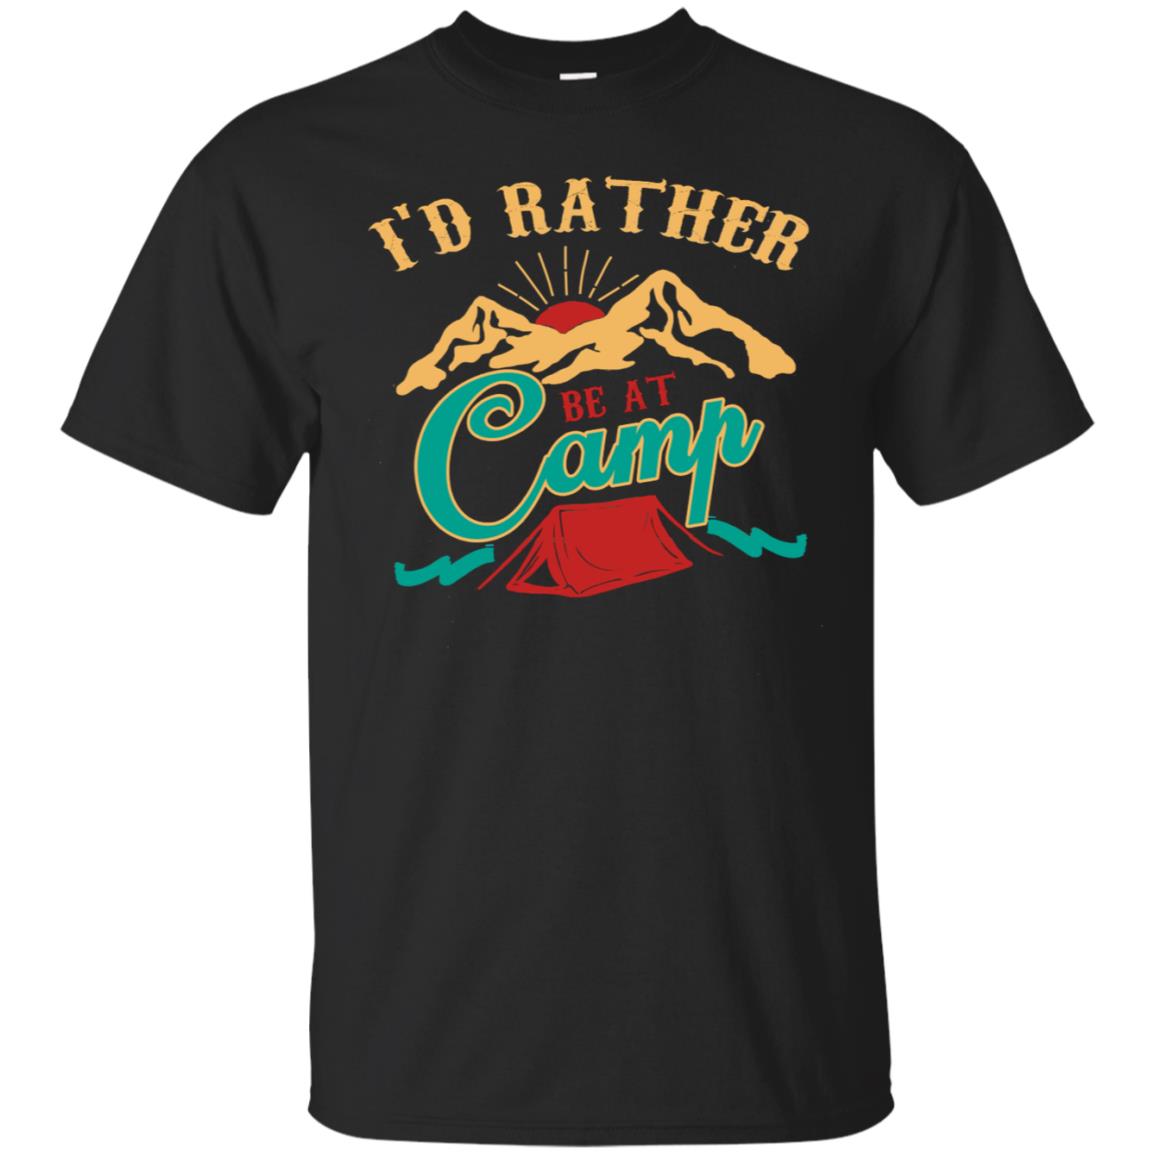 I'd Rather Be At Camp Camping Lovers Gift Shirt For Mens Of WomensG200 Gildan Ultra Cotton T-Shirt